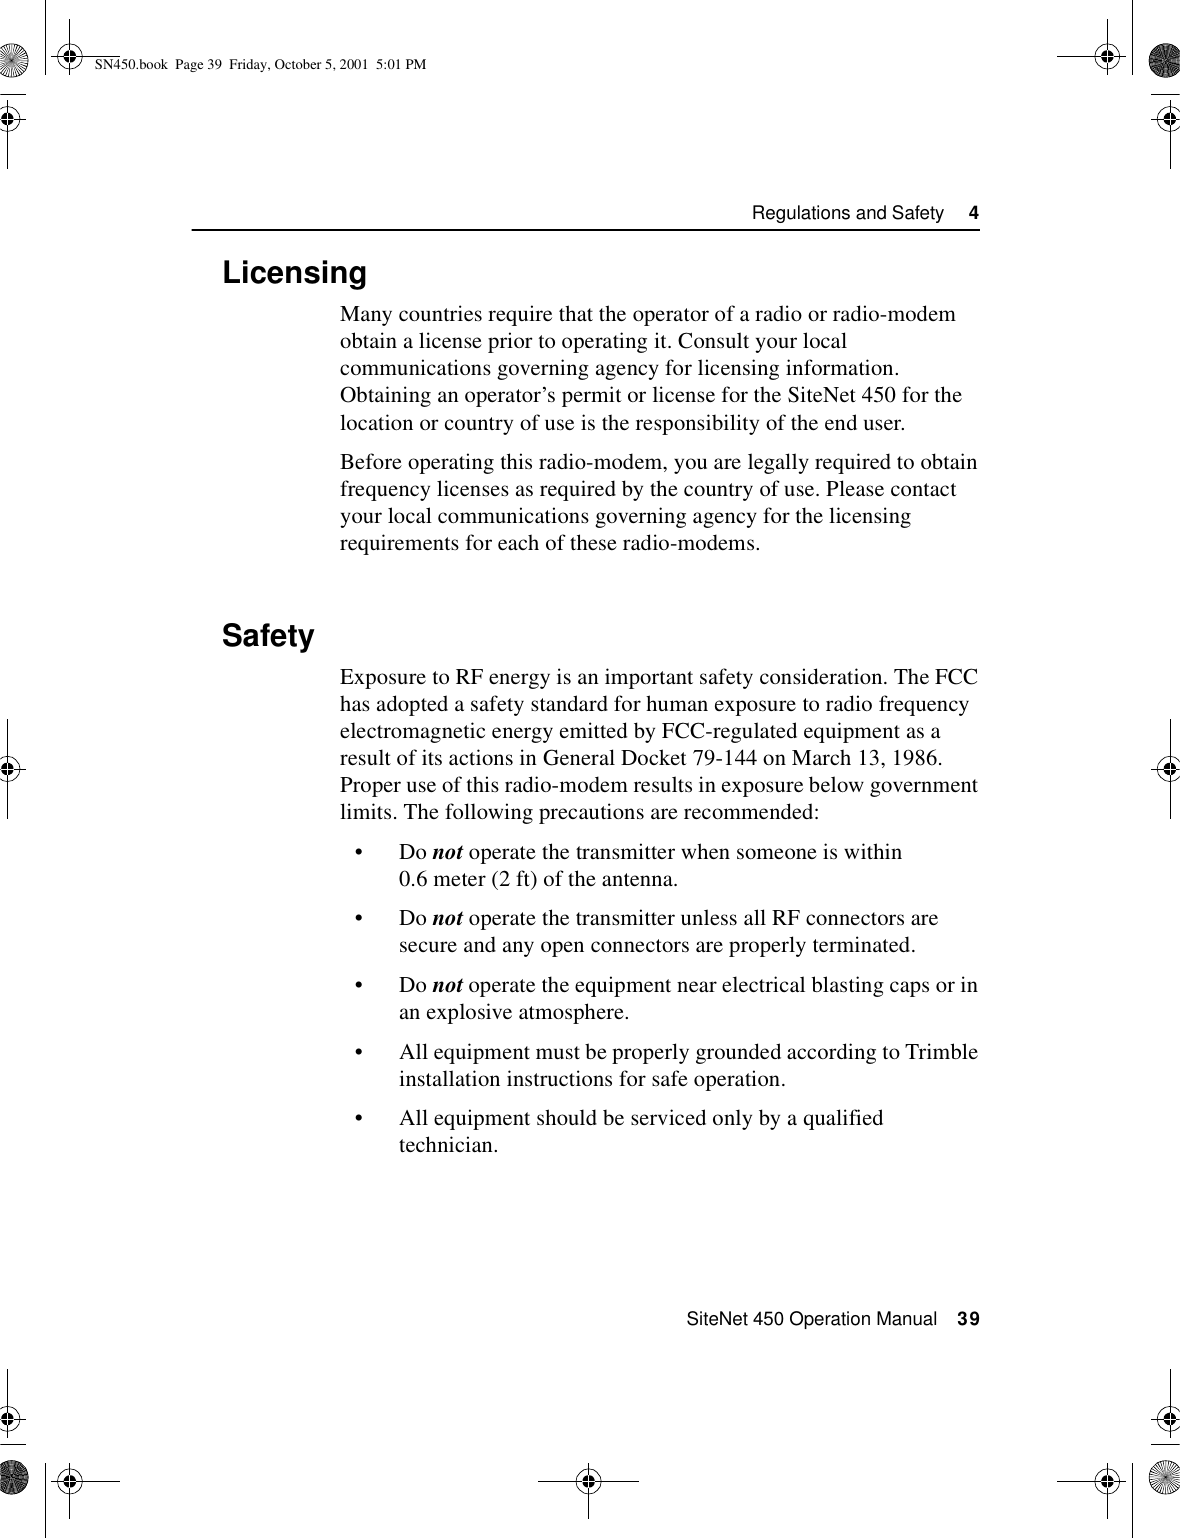  SiteNet 450 Operation Manual    39Regulations and Safety     44.3LicensingMany countries require that the operator of a radio or radio-modem obtain a license prior to operating it. Consult your local communications governing agency for licensing information. Obtaining an operator’s permit or license for the SiteNet 450 for the location or country of use is the responsibility of the end user.Before operating this radio-modem, you are legally required to obtain frequency licenses as required by the country of use. Please contact your local communications governing agency for the licensing requirements for each of these radio-modems.4.4SafetyExposure to RF energy is an important safety consideration. The FCC has adopted a safety standard for human exposure to radio frequency electromagnetic energy emitted by FCC-regulated equipment as a result of its actions in General Docket 79-144 on March 13, 1986. Proper use of this radio-modem results in exposure below government limits. The following precautions are recommended:•Do not operate the transmitter when someone is within 0.6 meter (2 ft) of the antenna.•Do not operate the transmitter unless all RF connectors are secure and any open connectors are properly terminated.•Do not operate the equipment near electrical blasting caps or in an explosive atmosphere.•All equipment must be properly grounded according to Trimble installation instructions for safe operation.•All equipment should be serviced only by a qualified technician.SN450.book  Page 39  Friday, October 5, 2001  5:01 PM